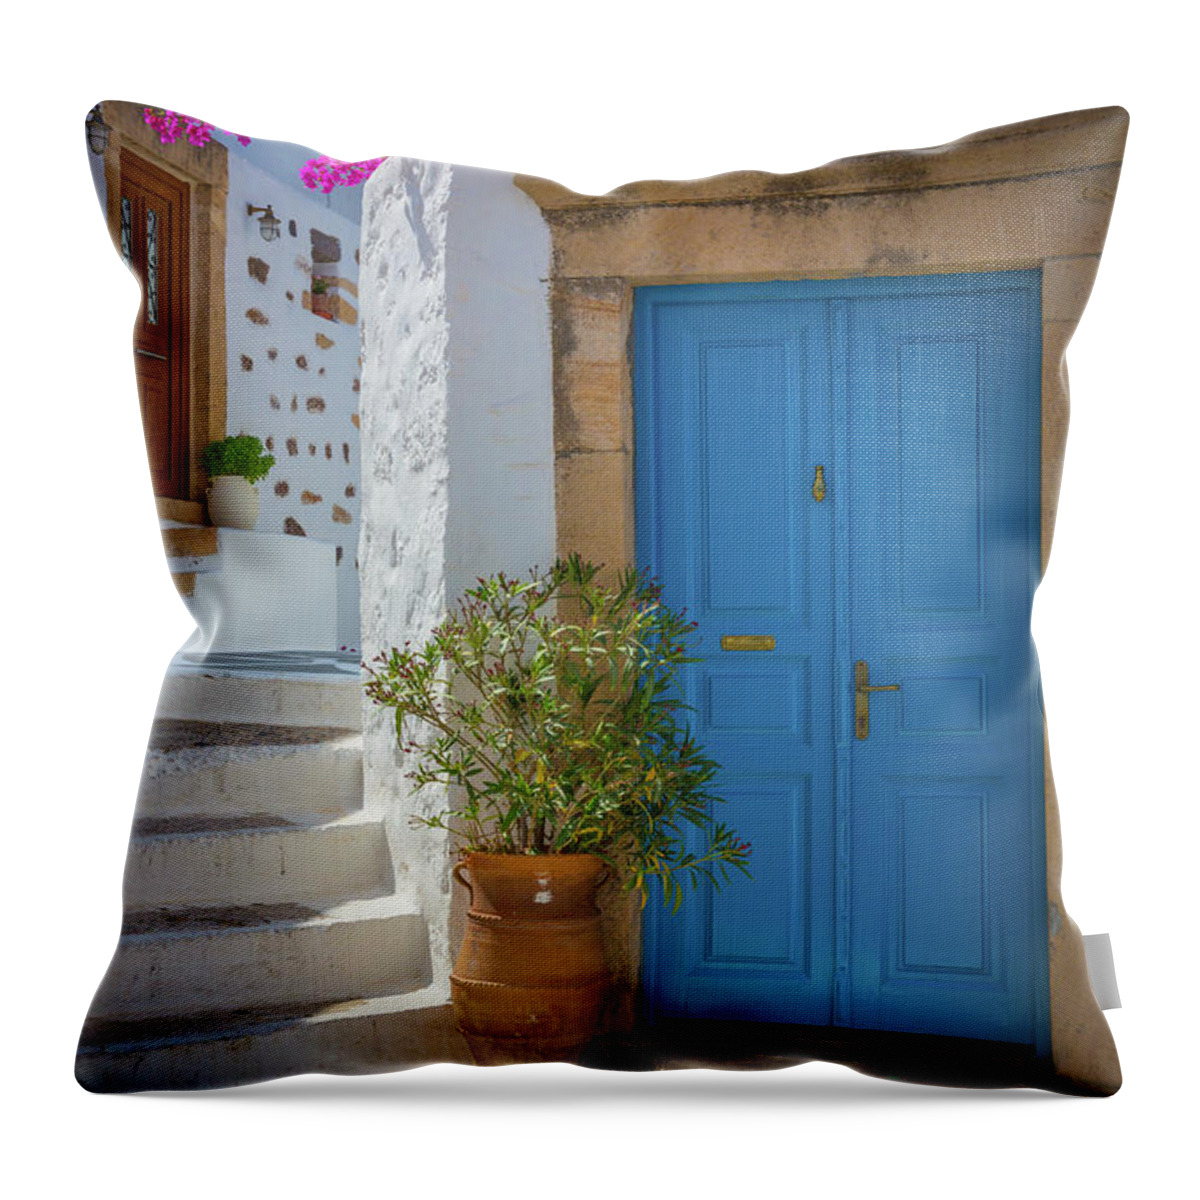 Aegean Sea Throw Pillow featuring the photograph Blue Door and Stairs by Inge Johnsson